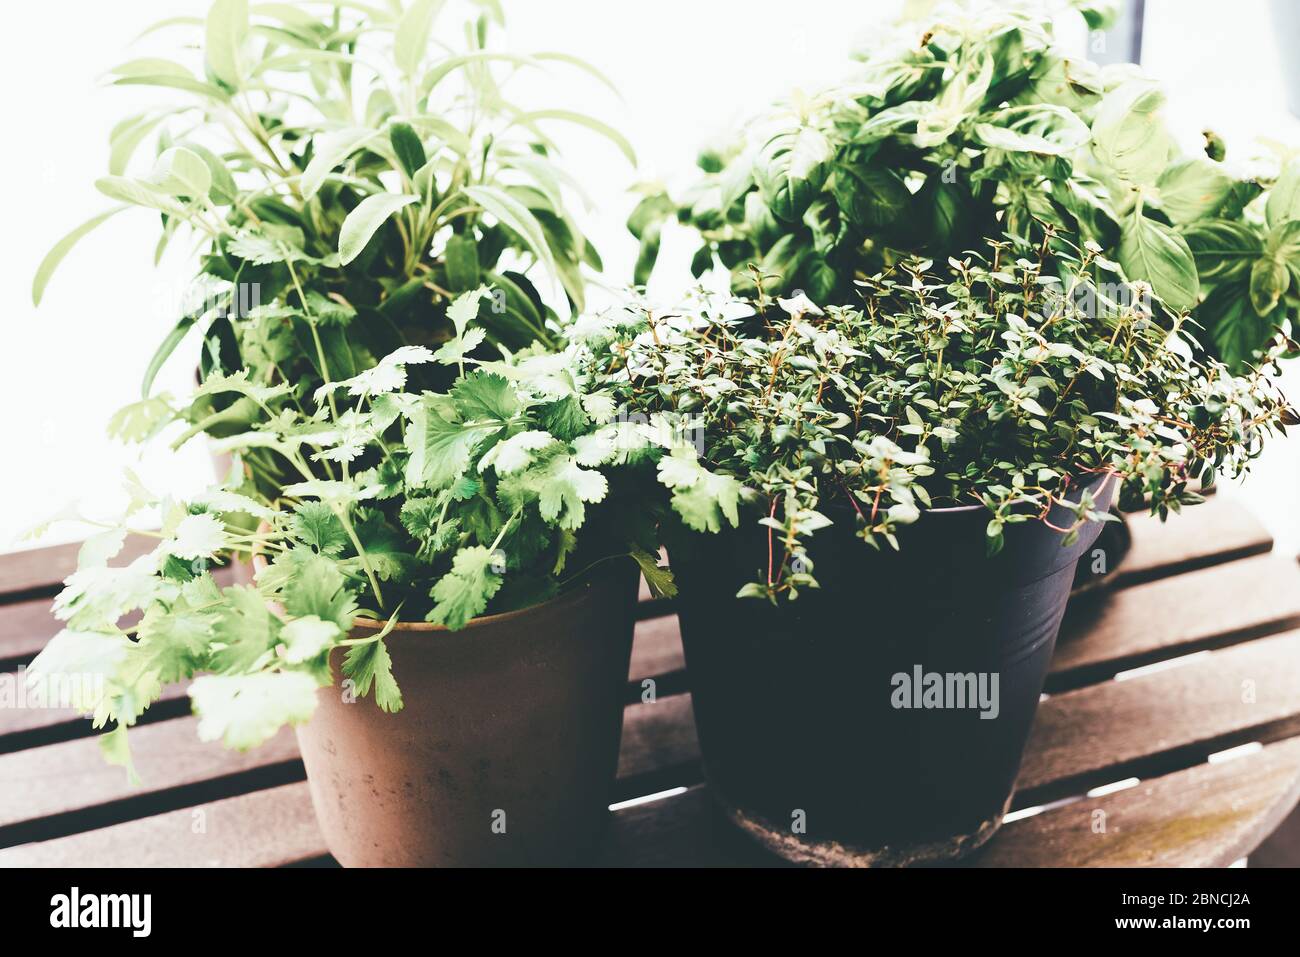 growing herbs on porch or balcony, close-up of potted basil, thyme, sage and coriander plants Stock Photo